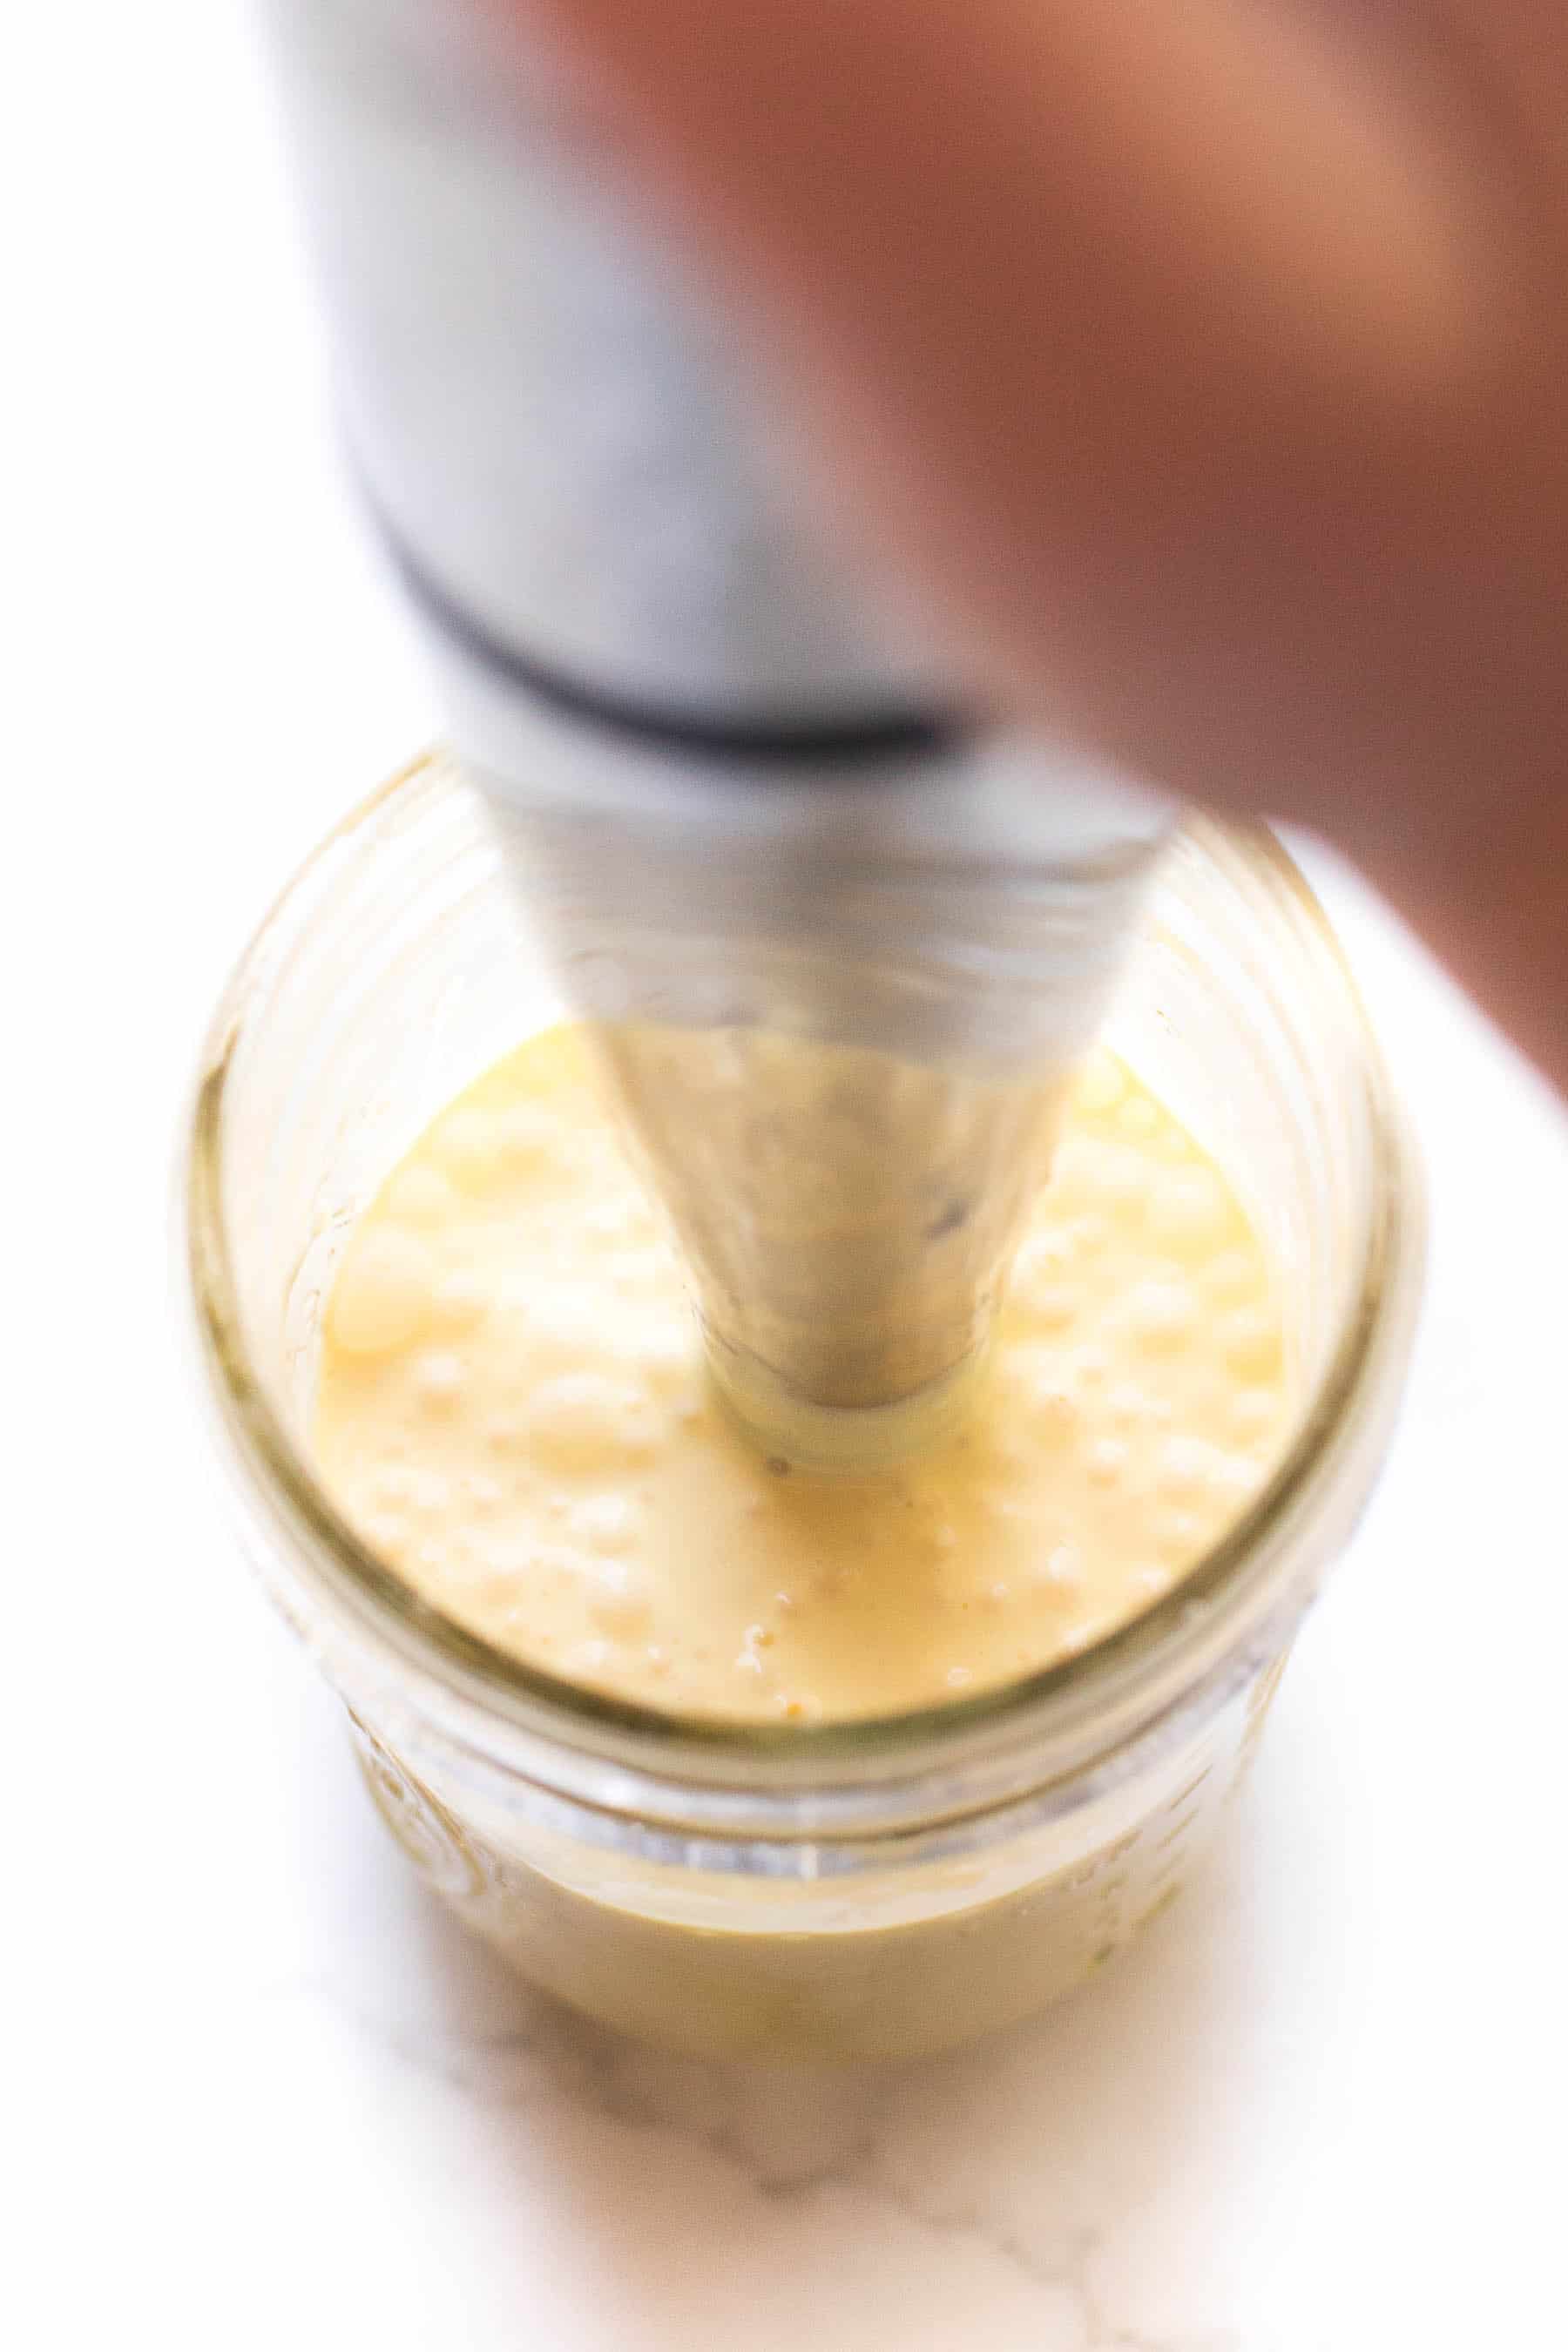 making hollandaise sauce in a mason jar with an immersion blender